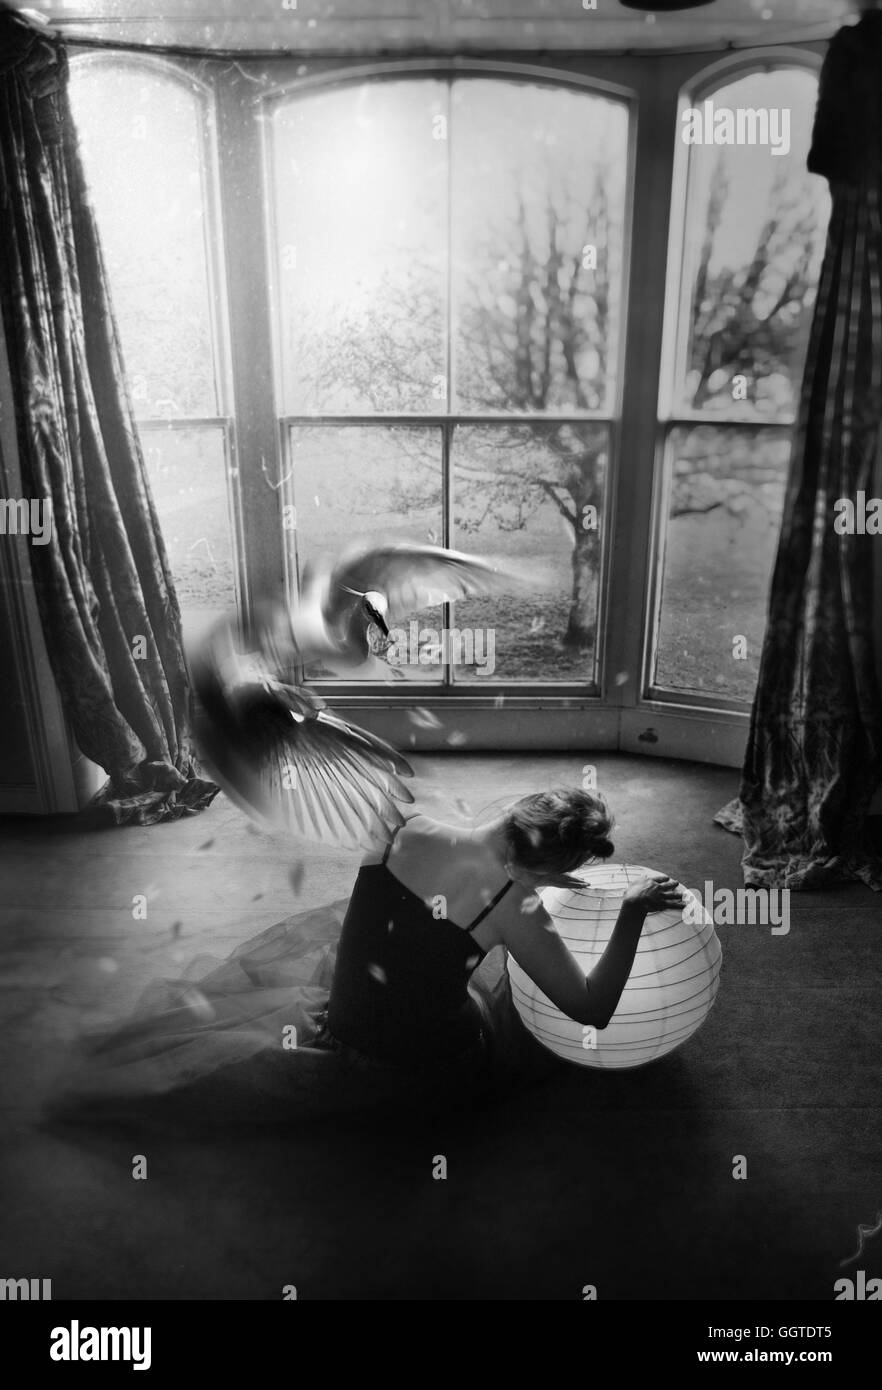 back view of the young woman sitting on the floor holding a ball with a big white bird flying Stock Photo